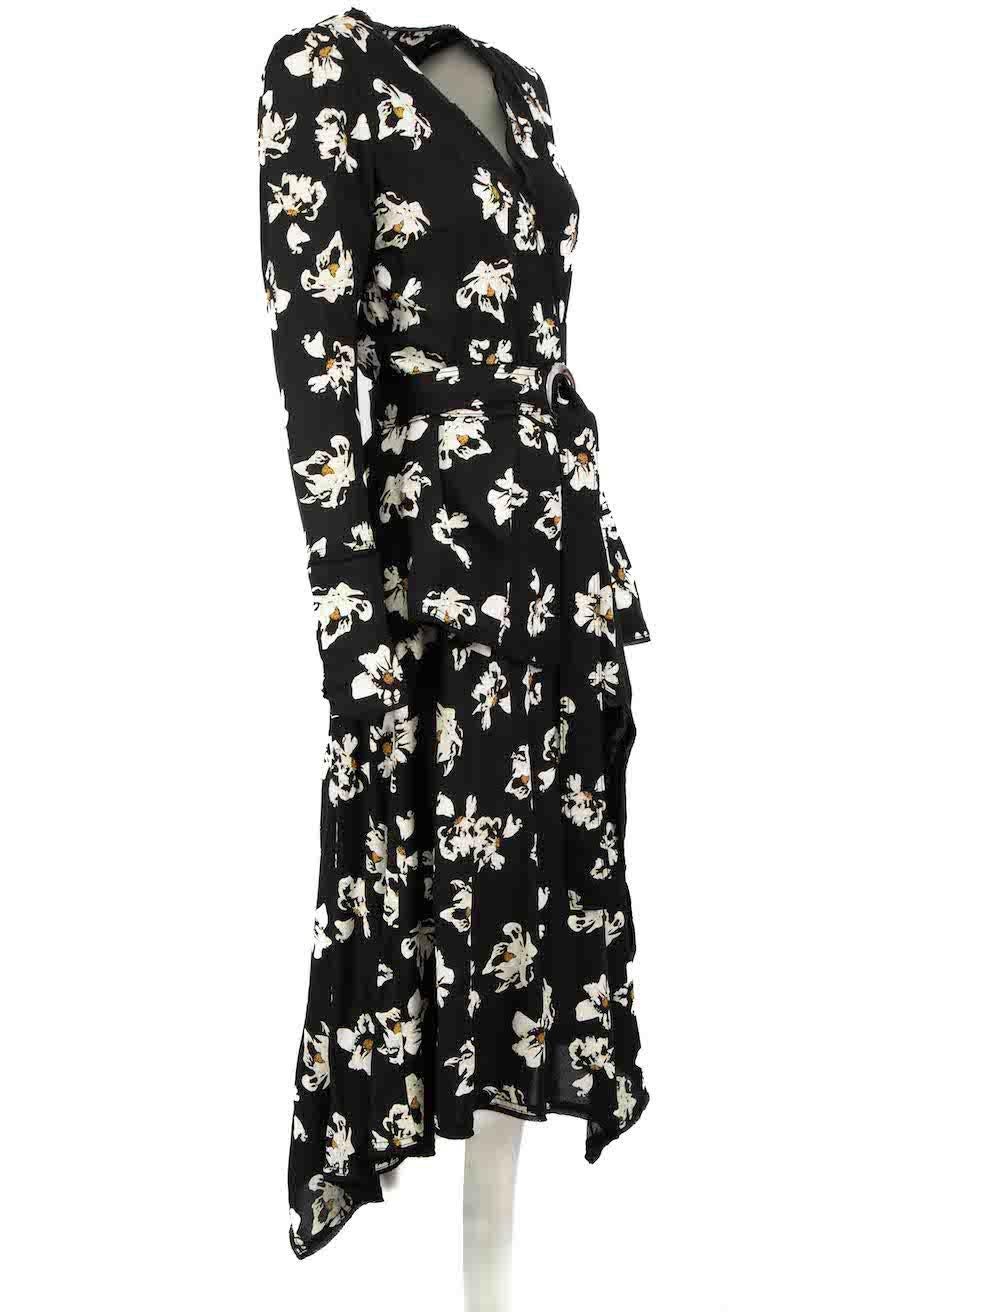 CONDITION is Very good. Minimal wear to dress is evident. Minimal wear to both underarm linings with discoloured marks on this used Proenza Schouler designer resale item.
 
Details
Black
Viscose
Midi dress
Floral print pattern
V neckline
Asymmetric